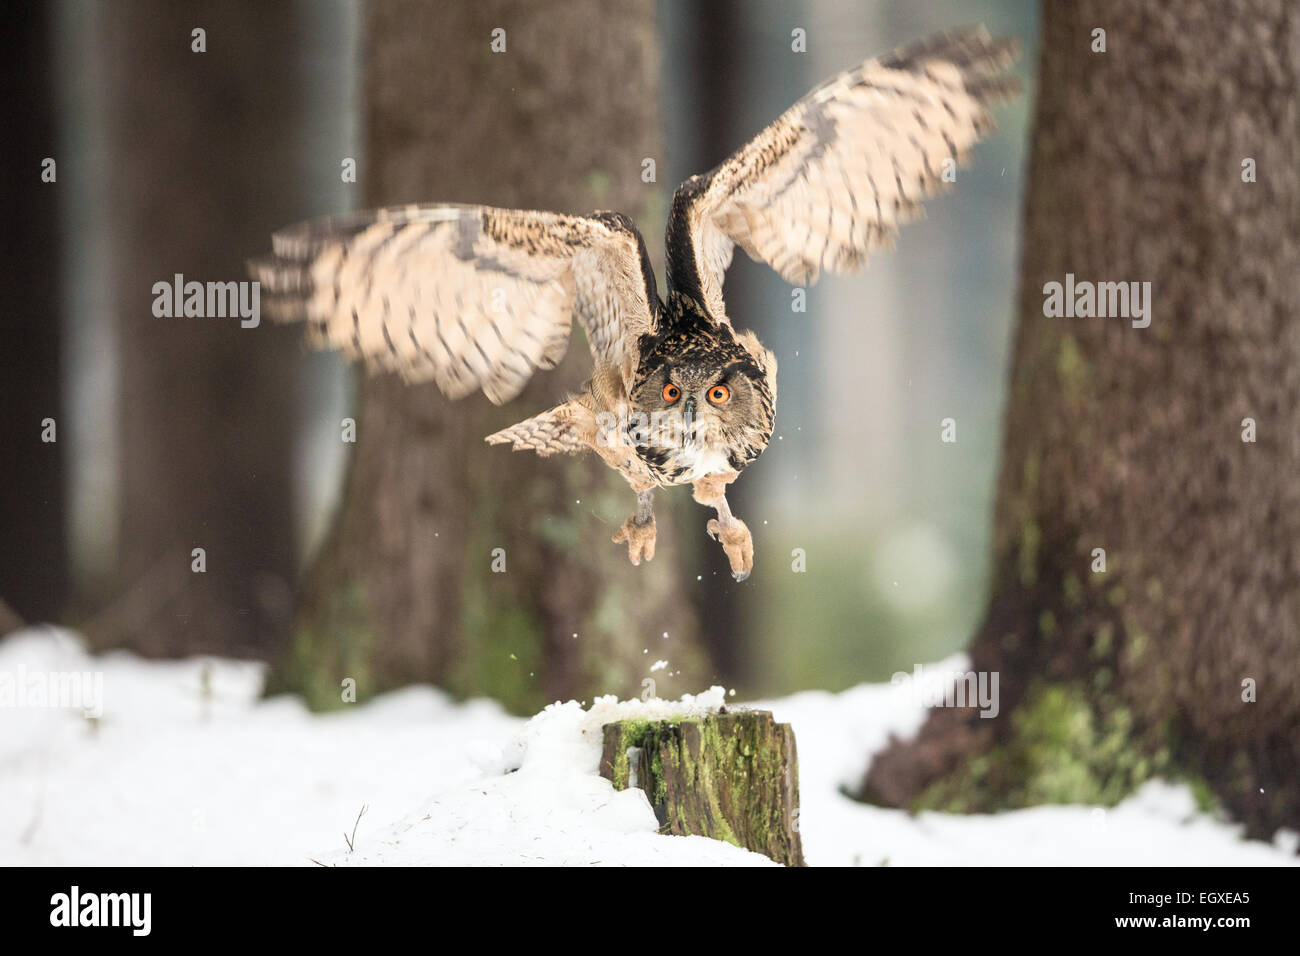 Eurasian Eagle Owl (Bubo bubo) flying through a forest in snow Stock Photo